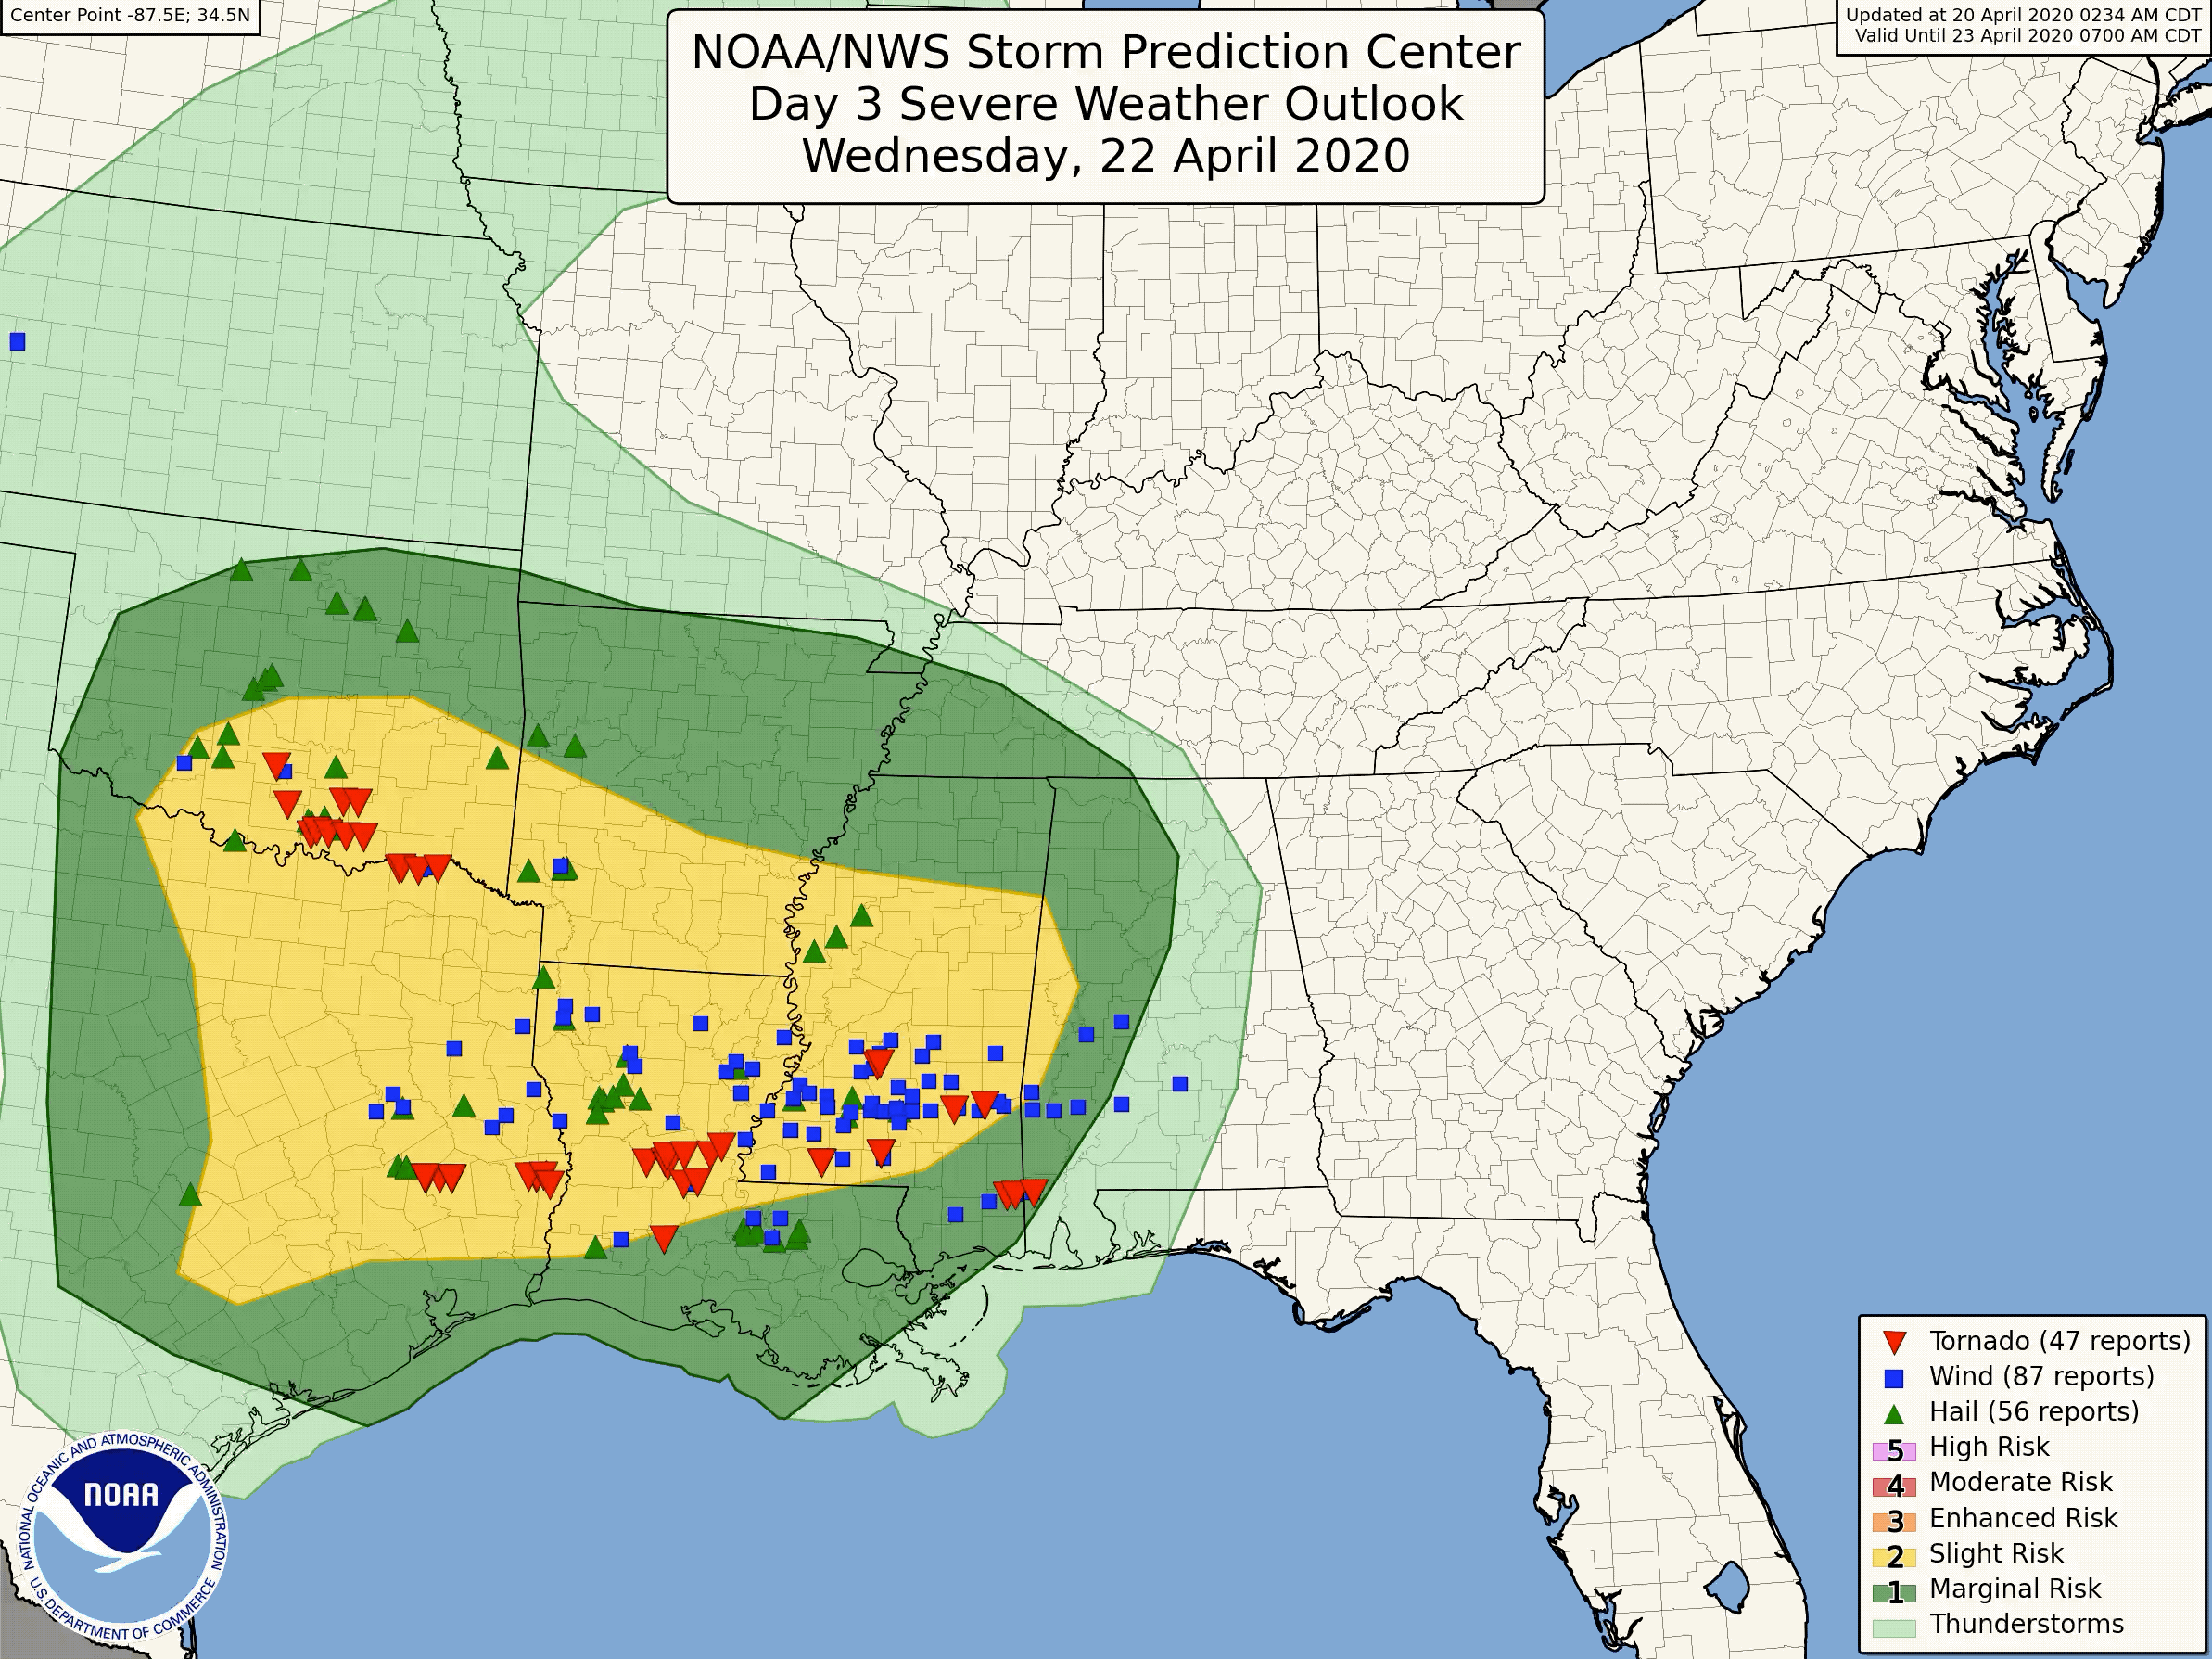 Evolution of national-scale severe weather outlooks from 3 days before up through the event with initial public reports of severe weather overlaid